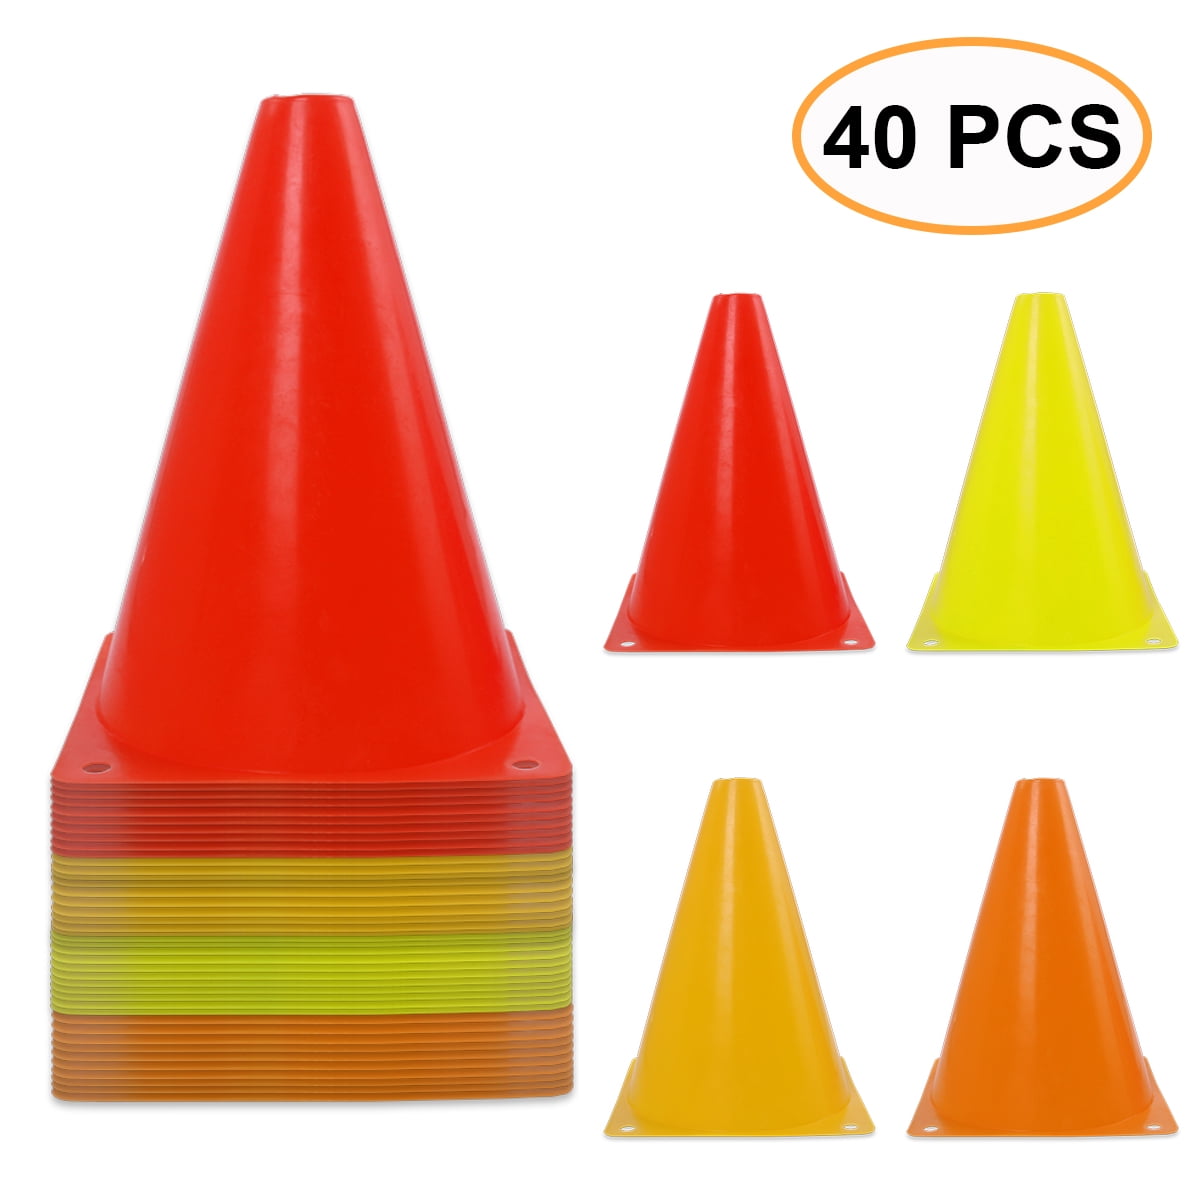 Fitness Running Agility Safety Training Boundry Marking Cones Set Of 50 Assorted 